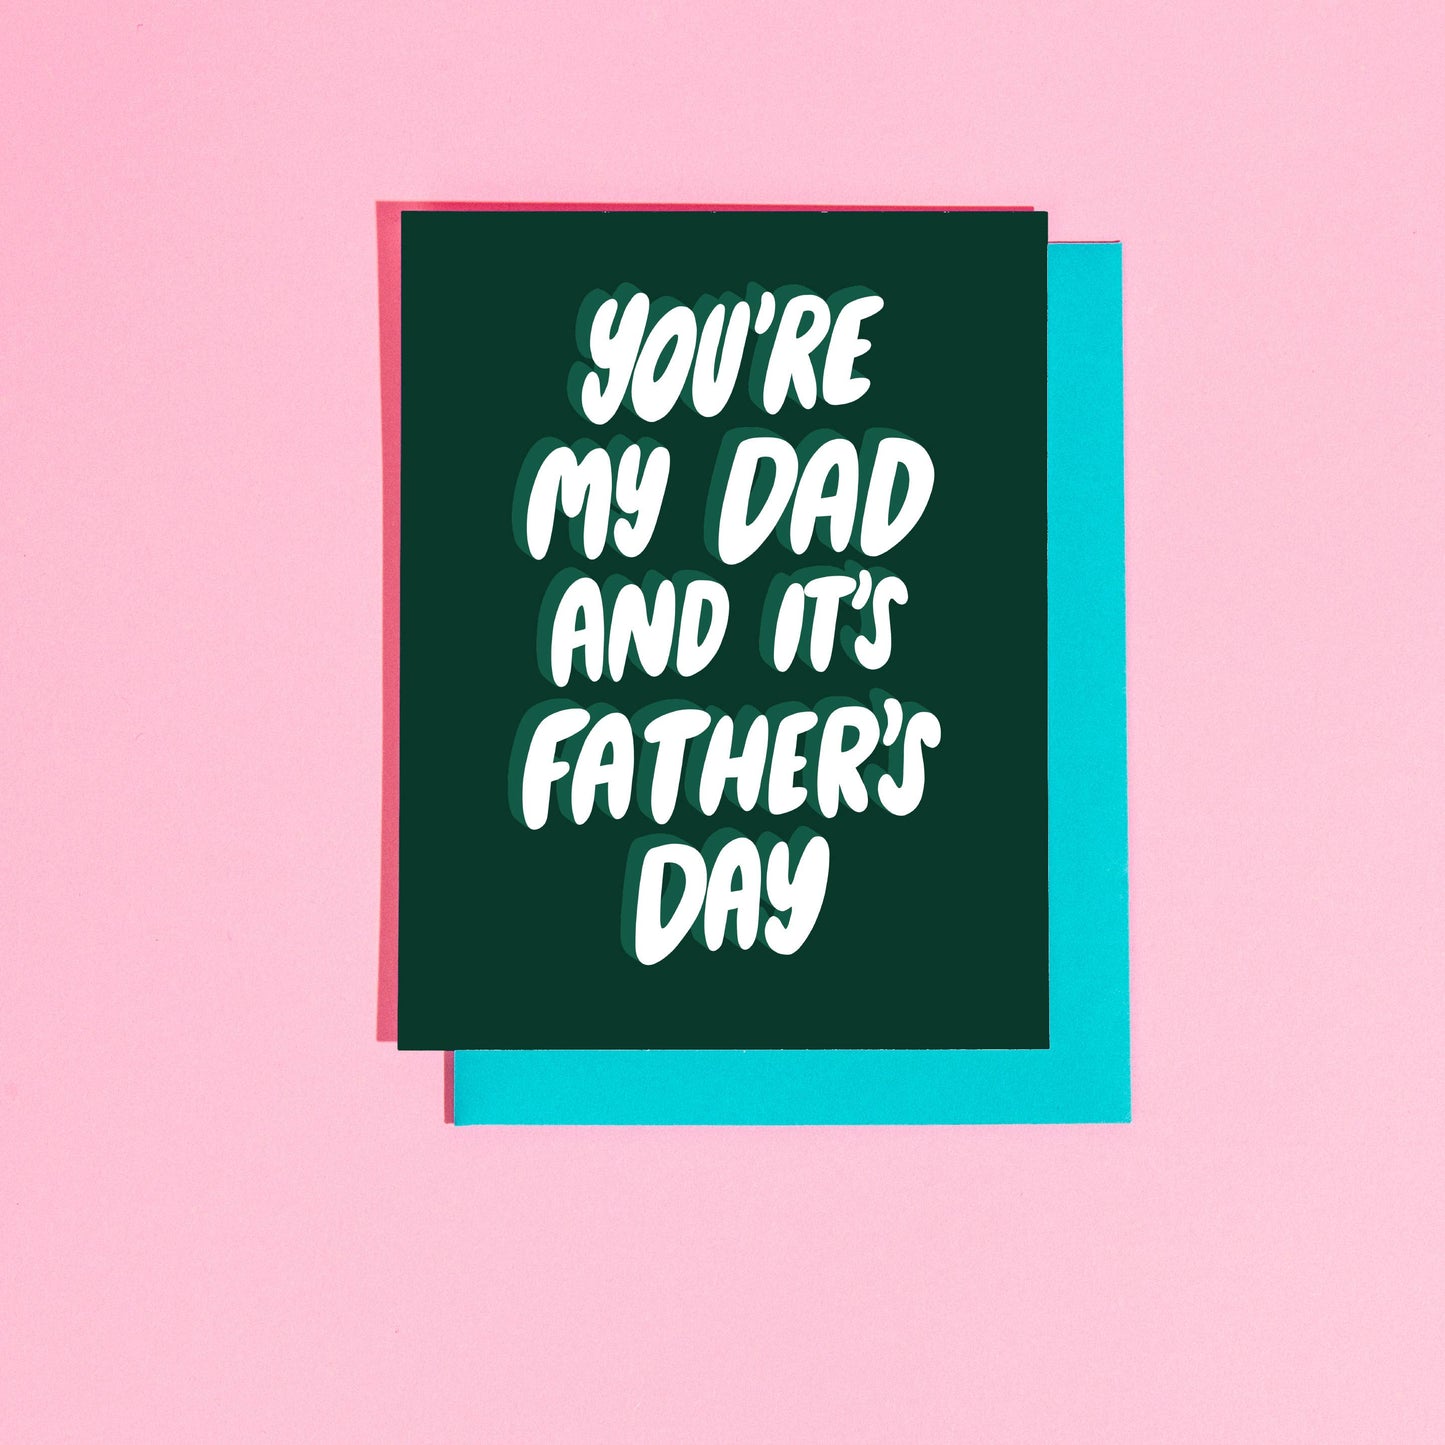 You're My Dad and It's Father's Day Greeting Card